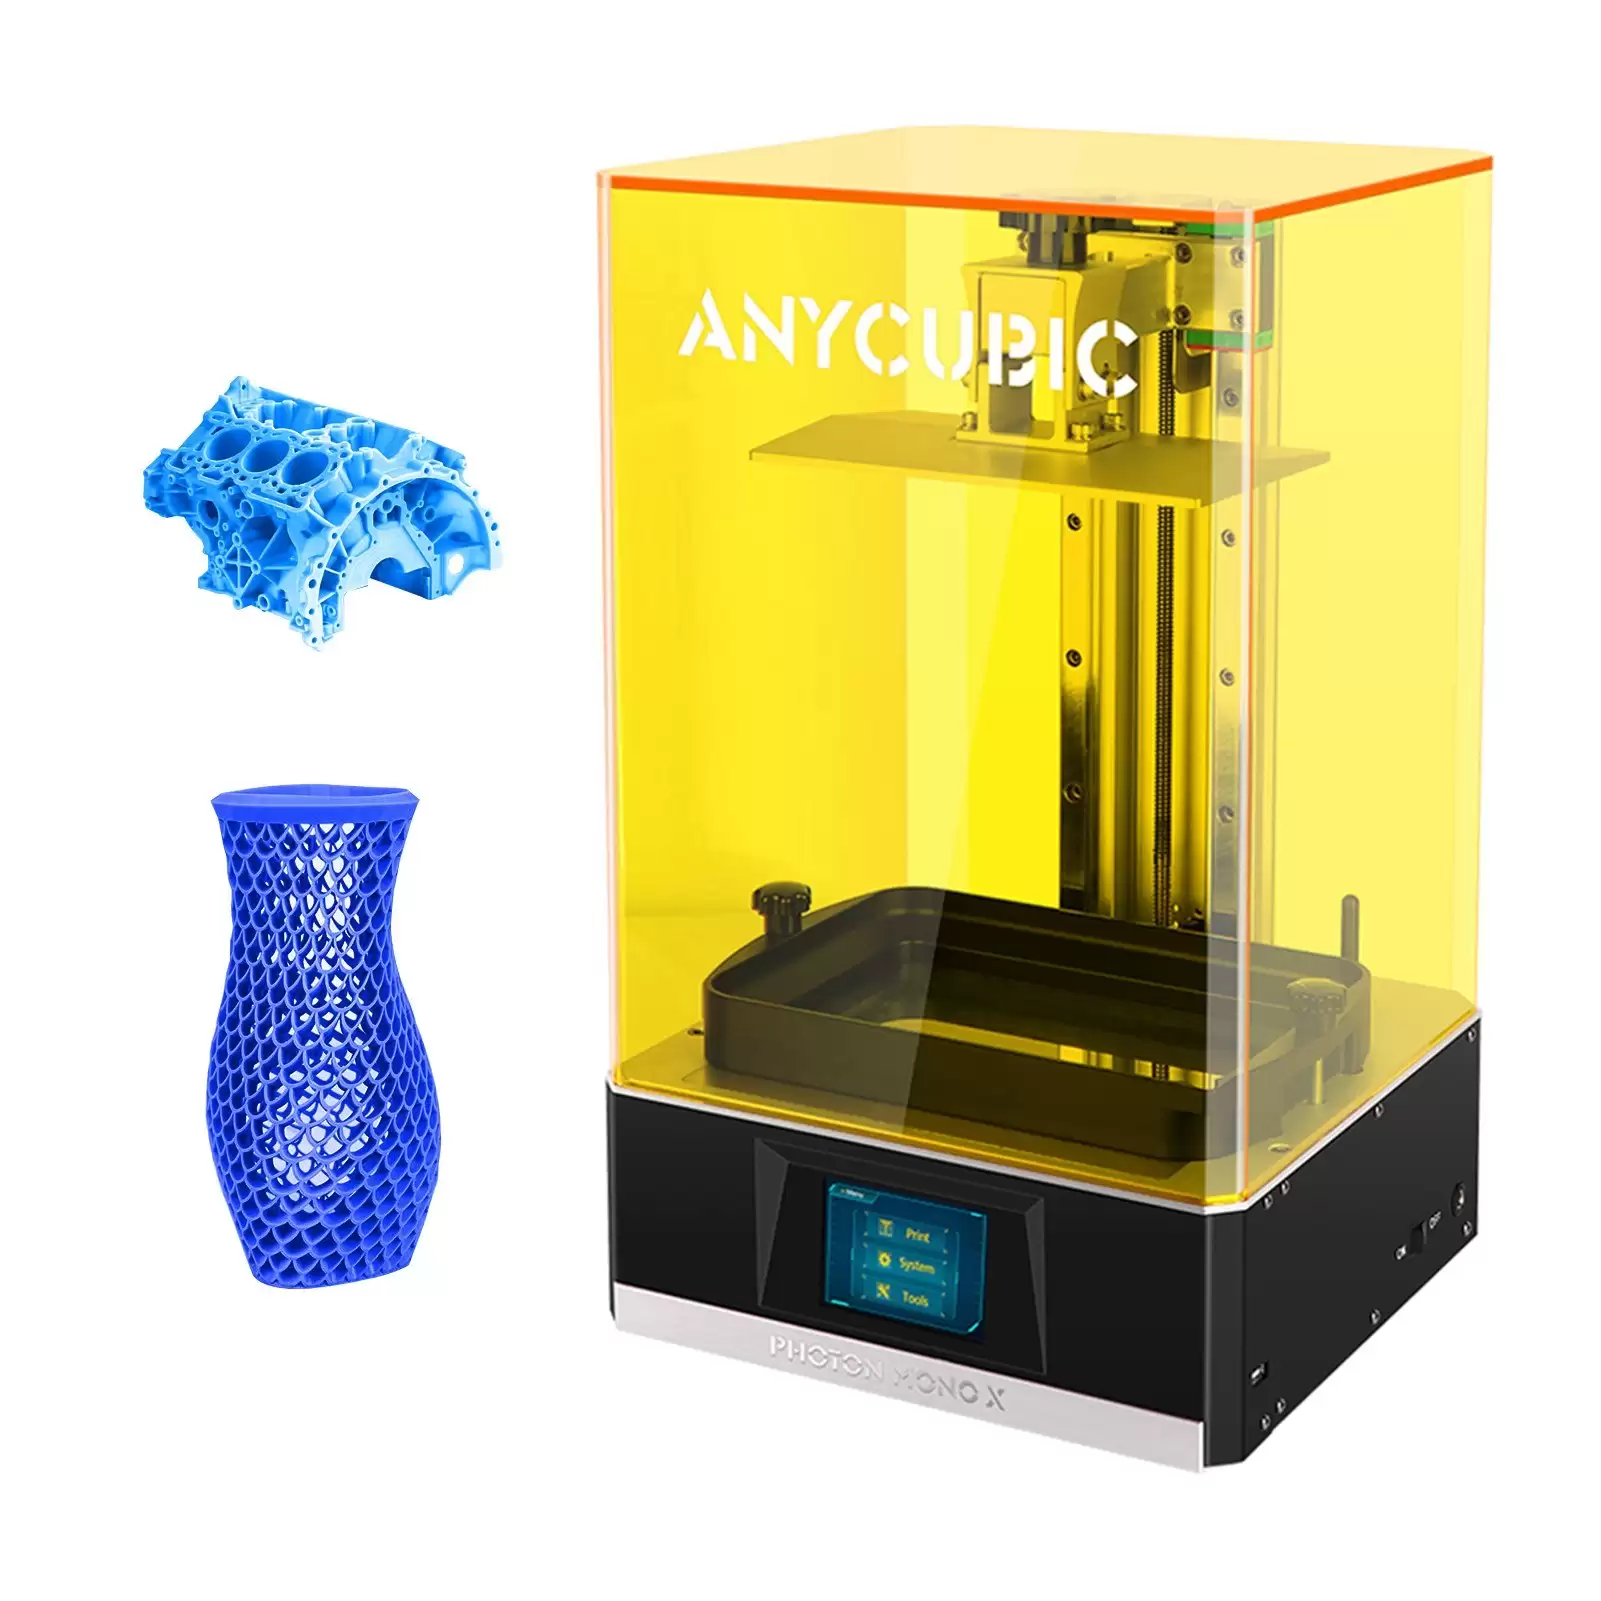 Get $230 Discount On Anycubic Photon Mono X 3d Printer With This Discount Coupon At Tomtop